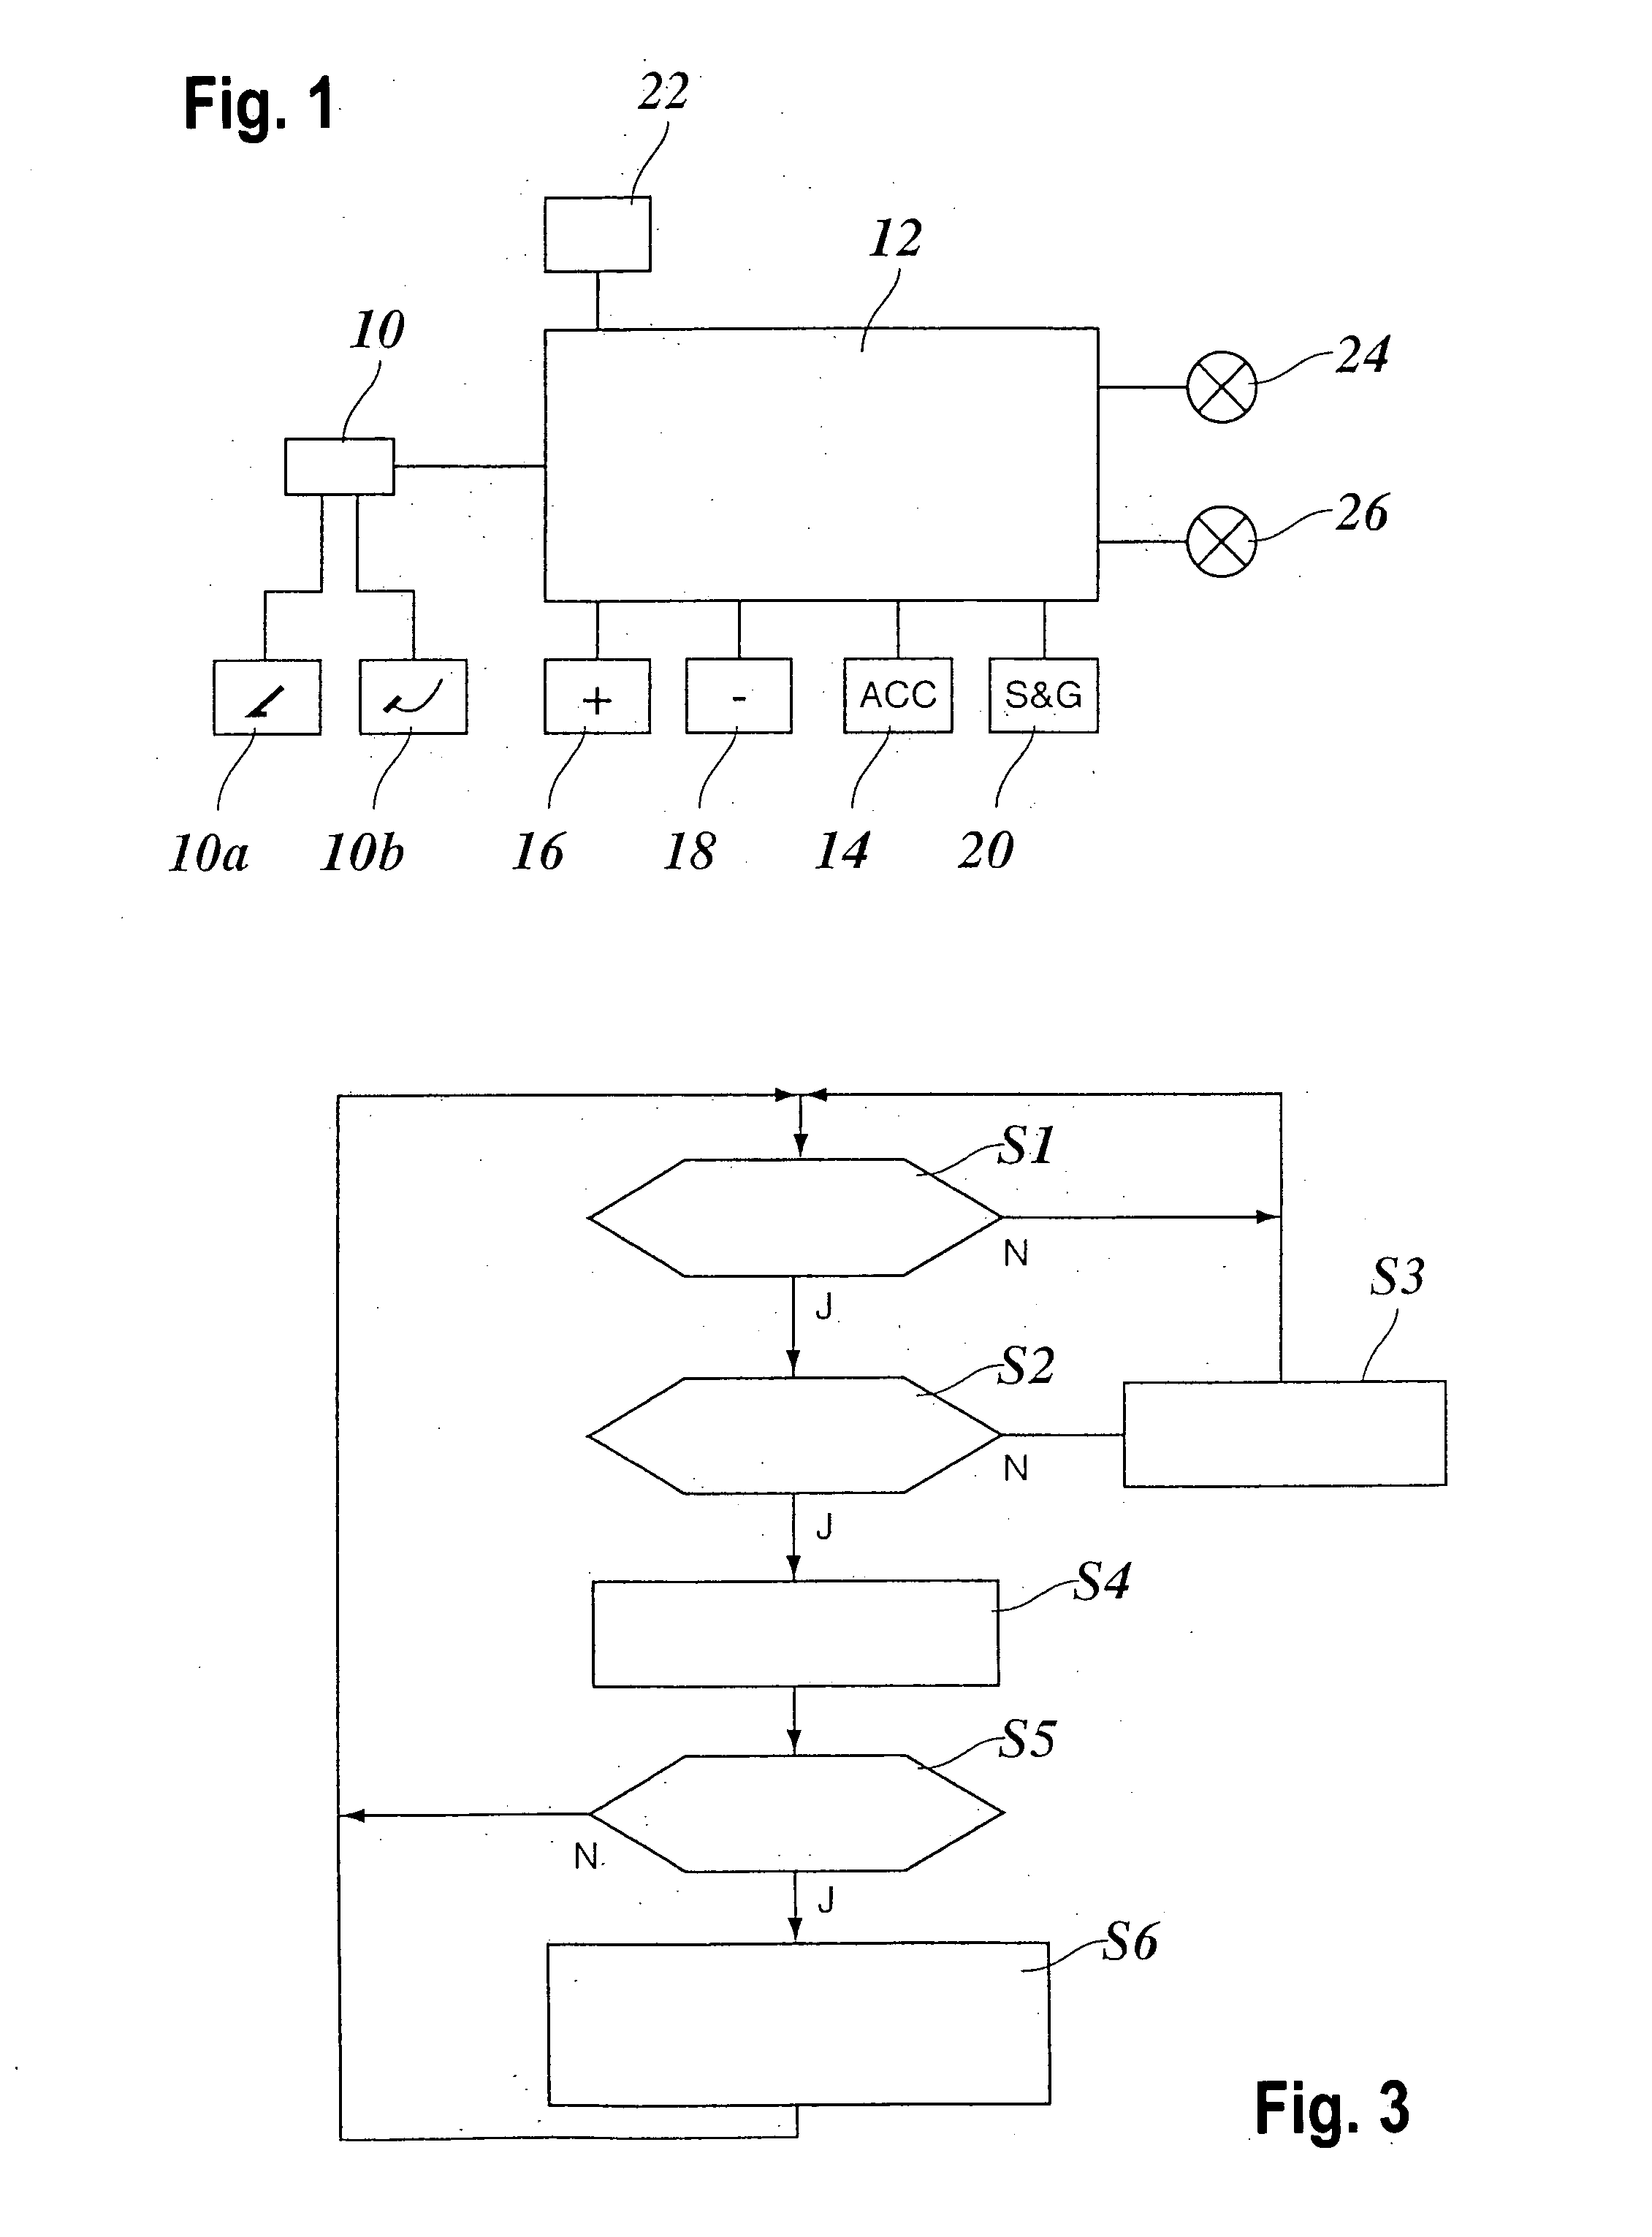 Cruise control system having a stop function